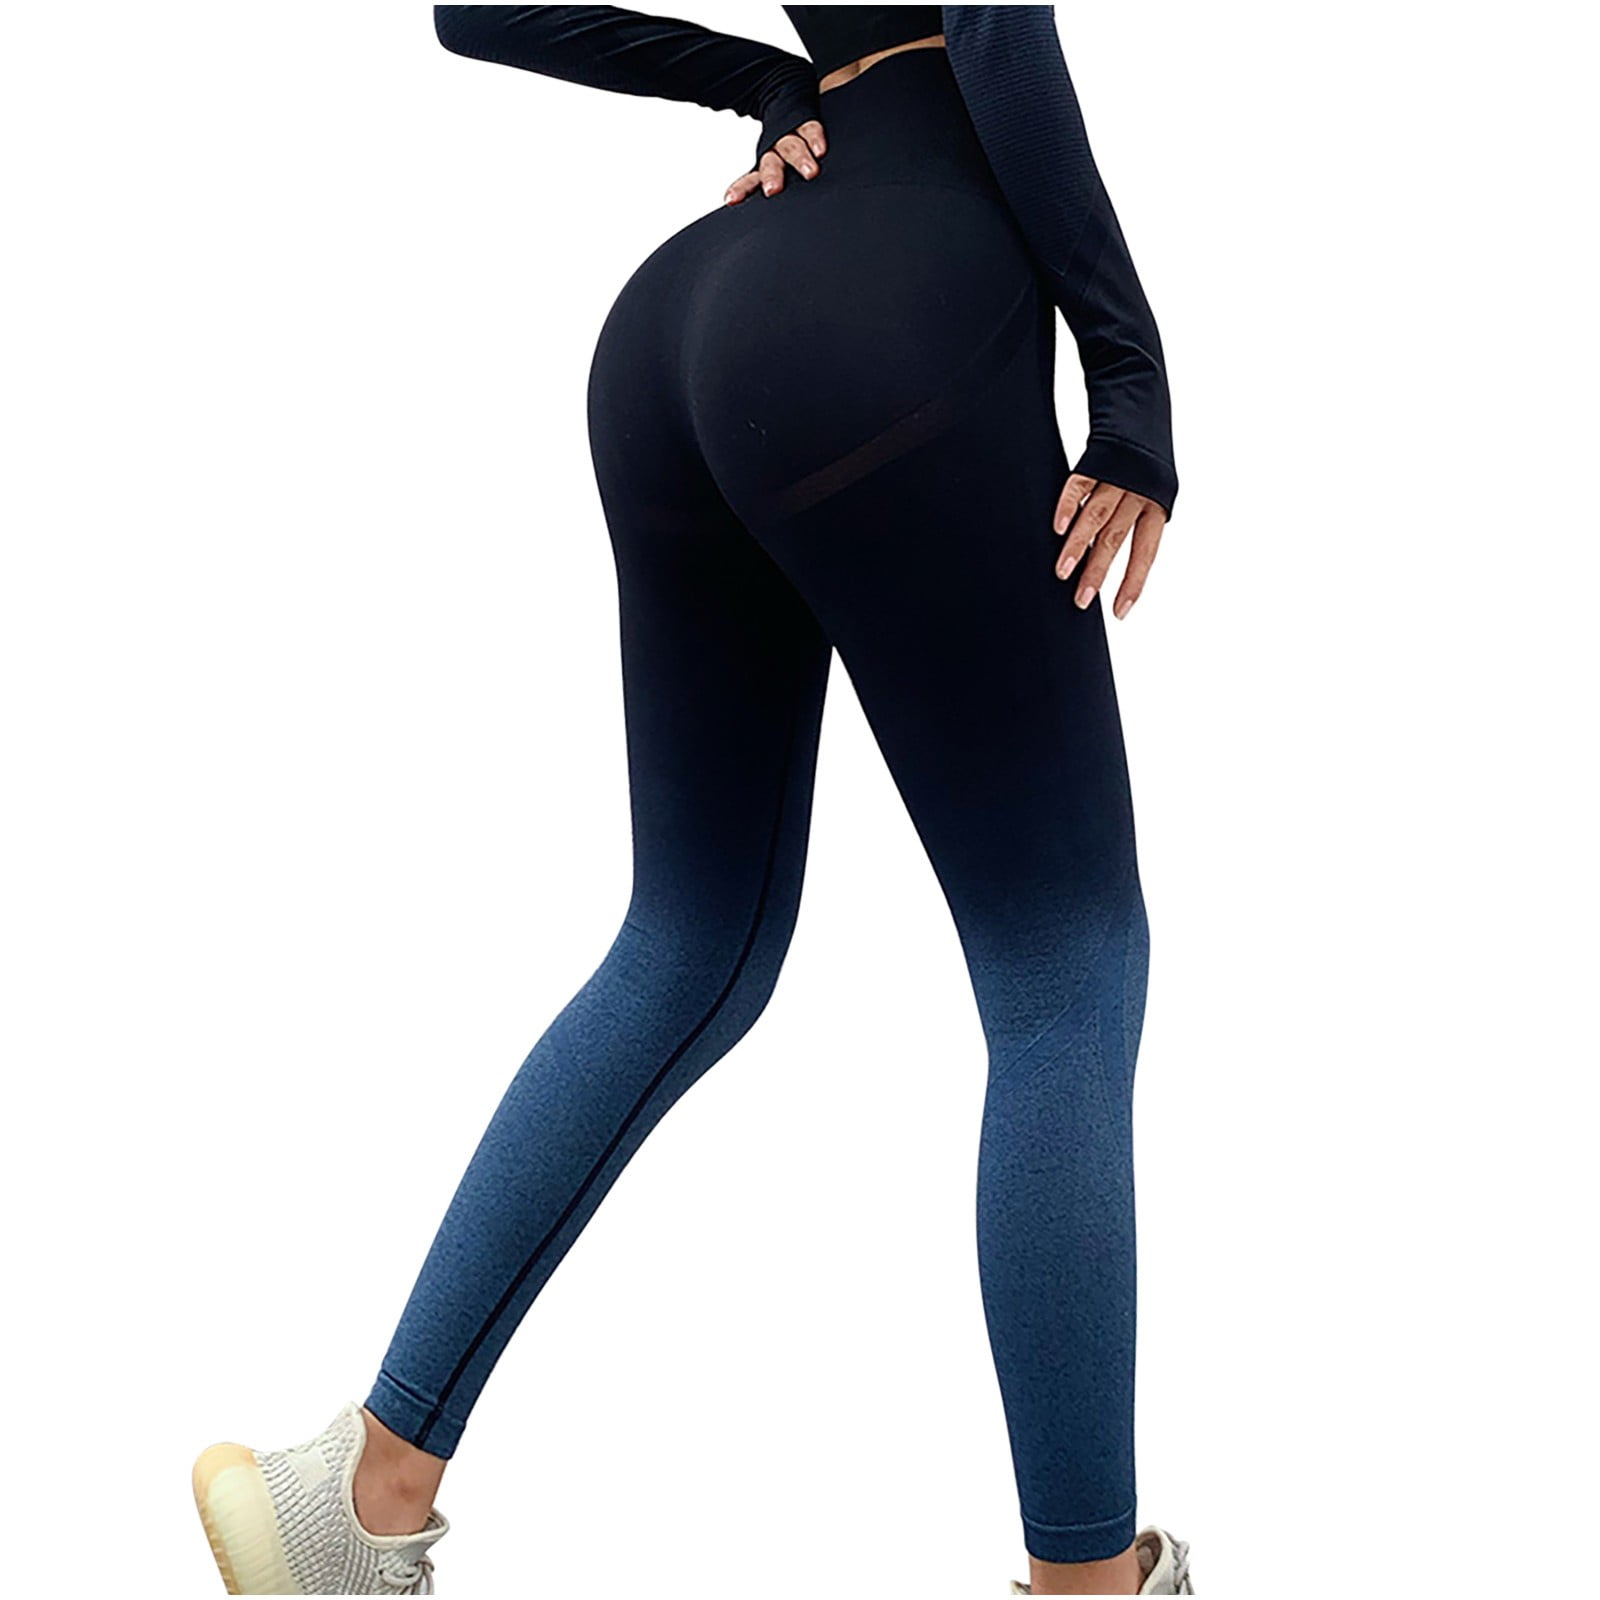 Breathable High Waist Leggings For Women Quick Dry, Gym/Yoga/Sports Tights  With Love Design, Perfect Birthday Gift From Cartwright, $20.23